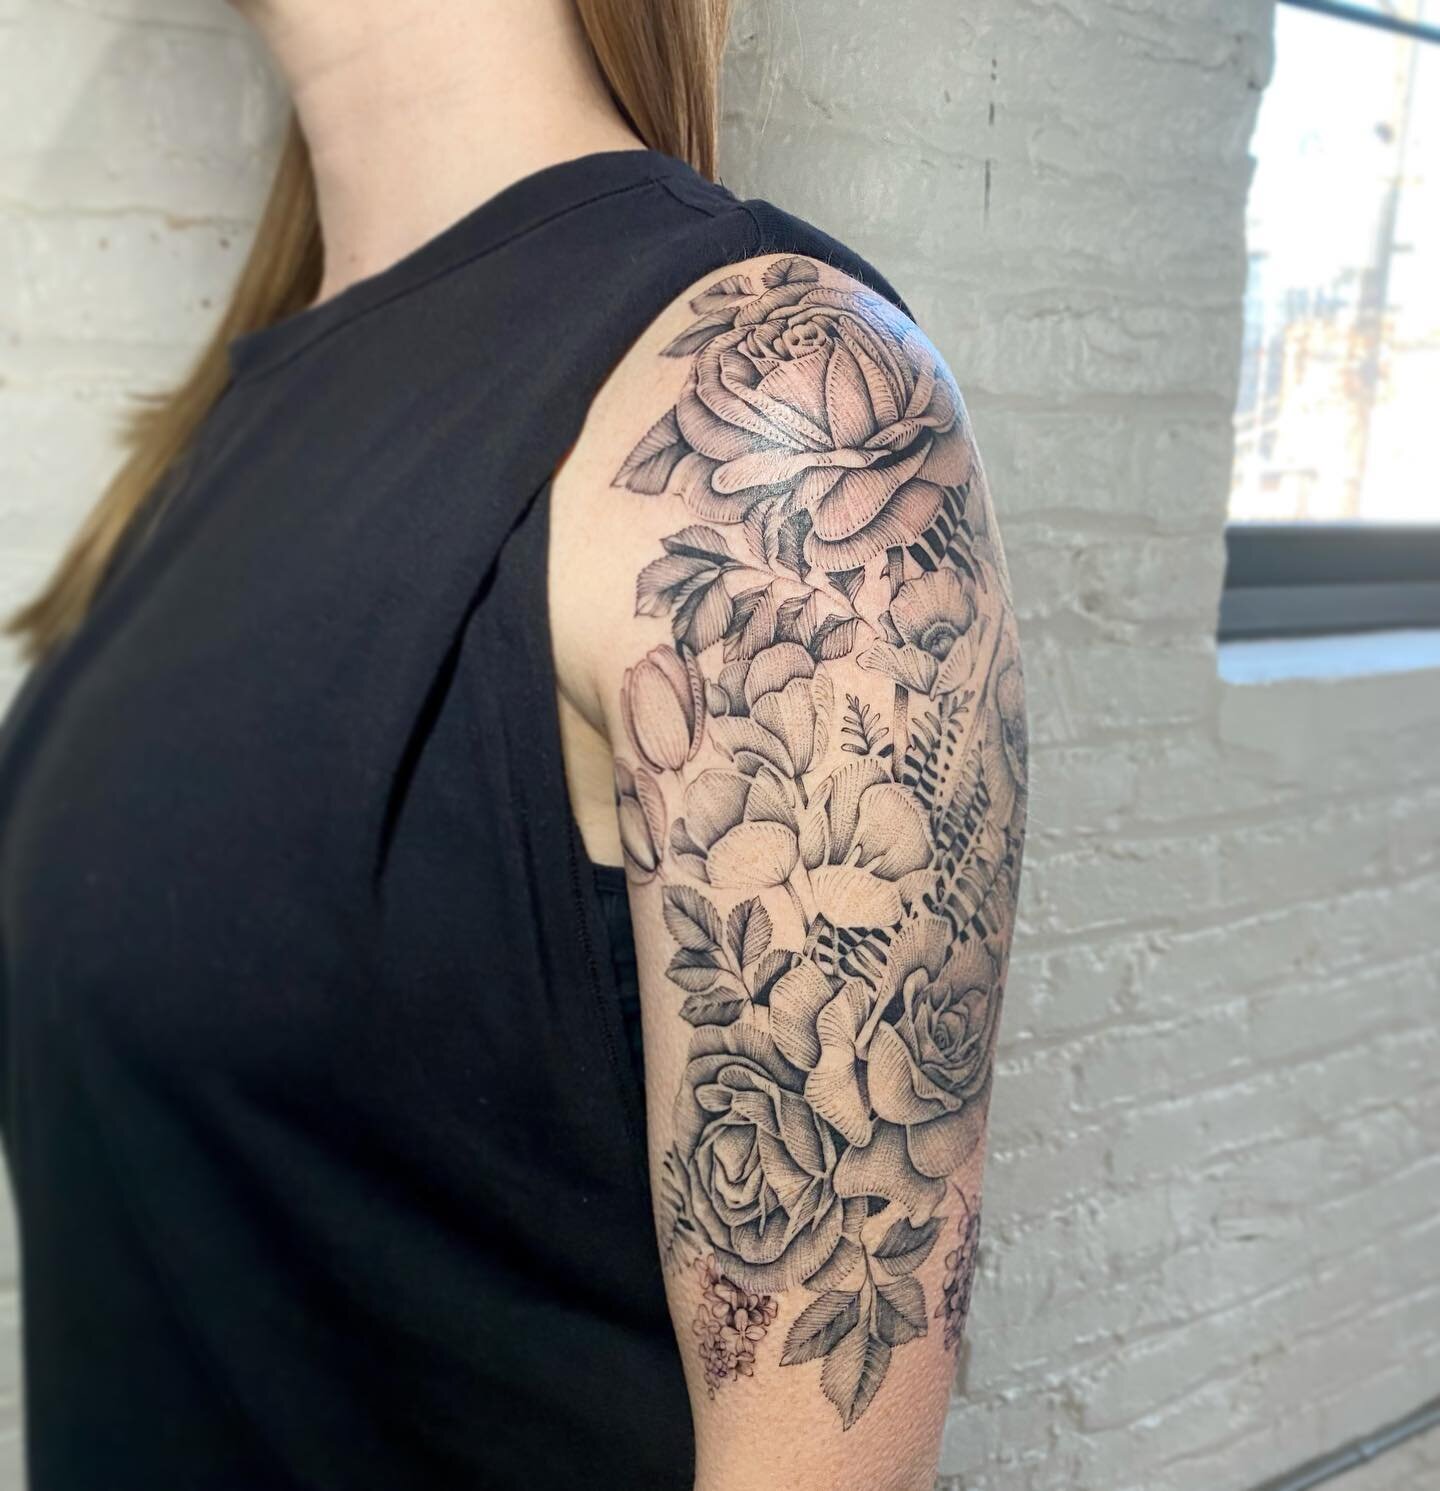 #workinprogress sleeve for @meganizzle &mdash; roses, tulips, poppies, lilacs and ferns. 
🌸🌸🌸
I don&rsquo;t usually share work in progress pieces. Should I do that more often? What do you think?&rdquo;
🌿🌿🌿
&hellip;
&hellip;
&hellip;
&hellip;
#c